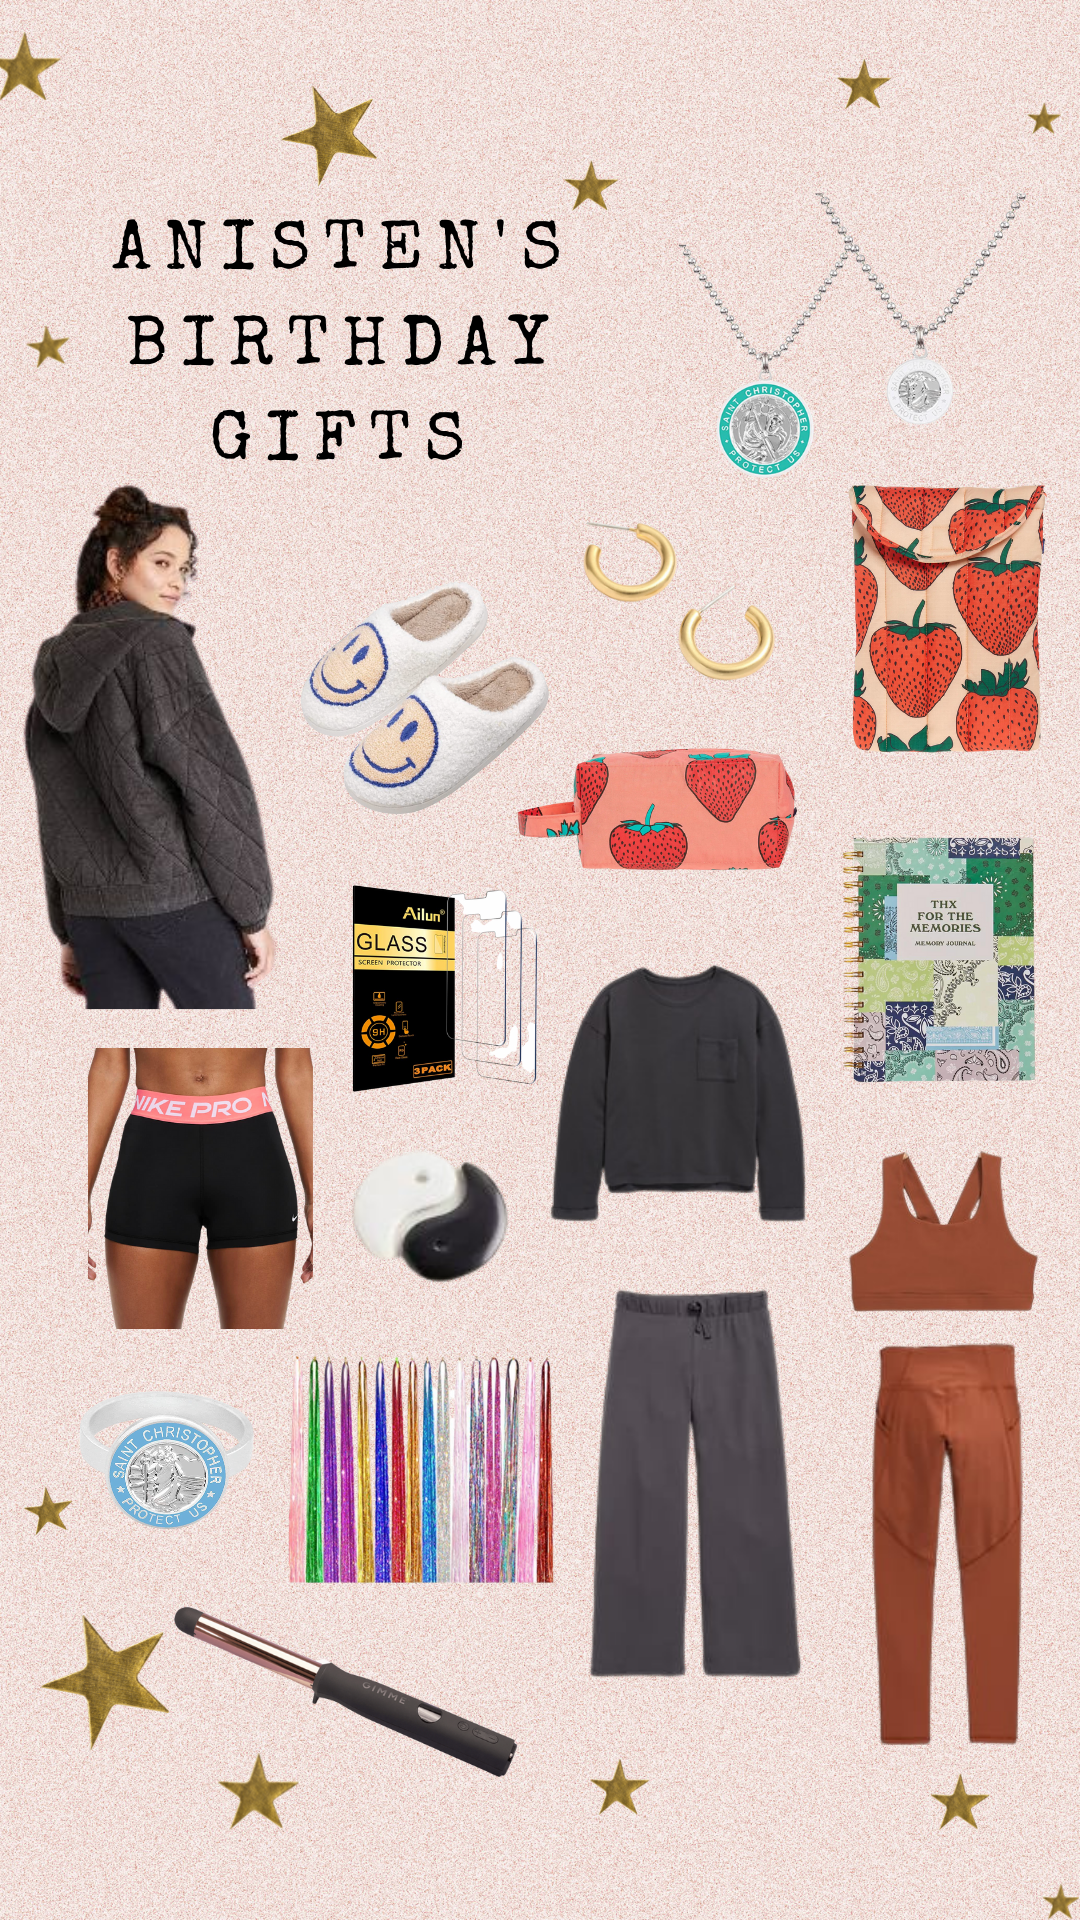 Favorite Things Party Holiday Gift Guide - 2023 – Tara Thueson